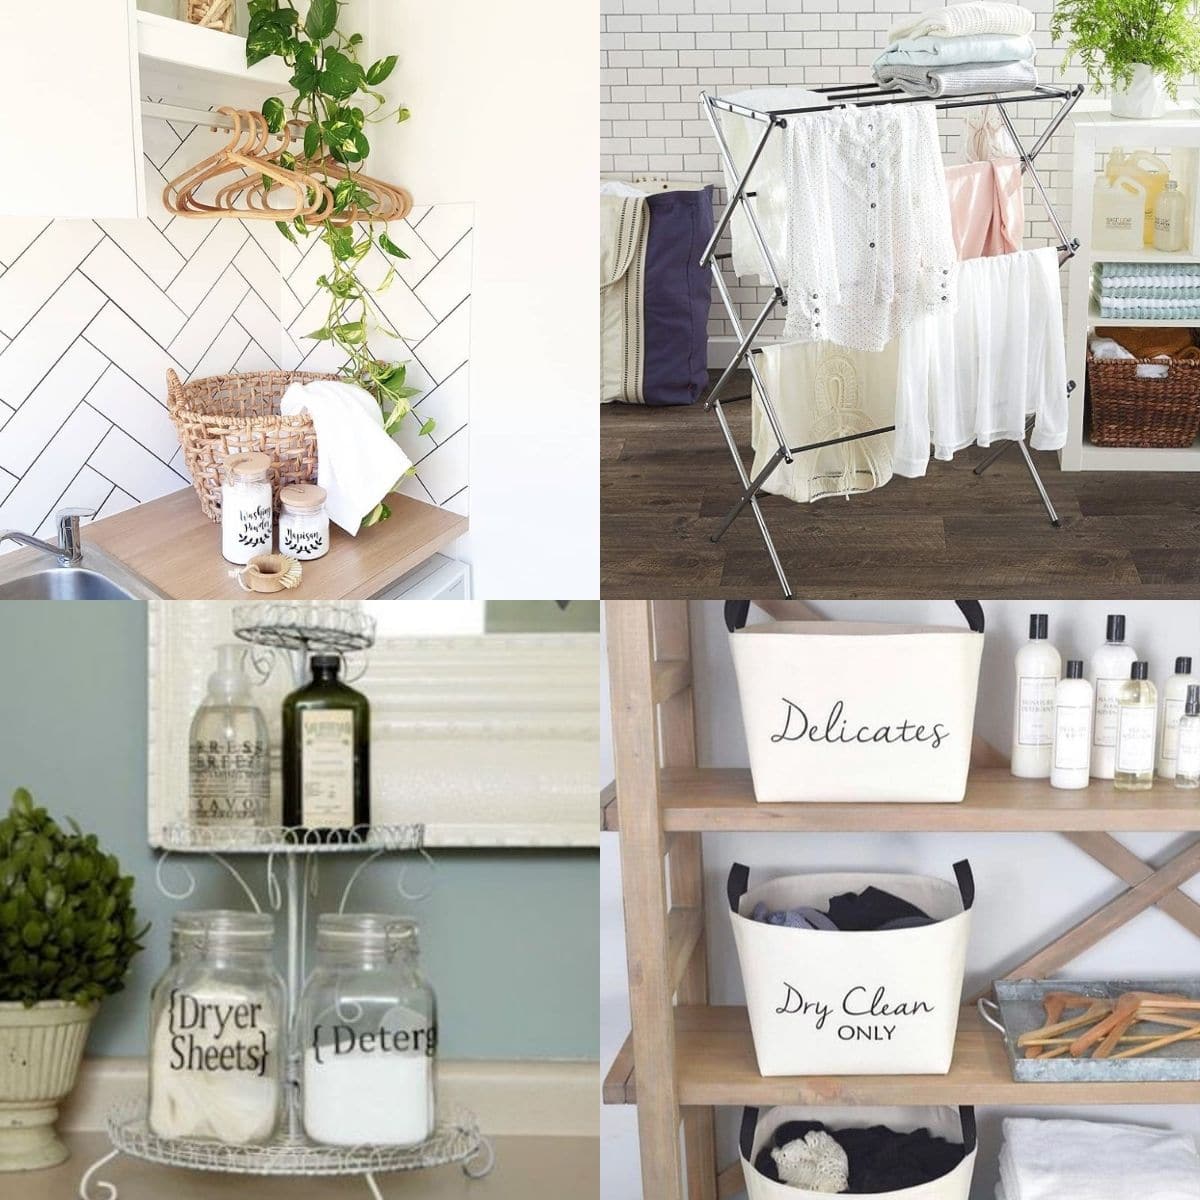 Laundry room can get messy!

Use these storage hacks to keep your laundry room neat and beautiful. 😉

#Storage #StorageIdeas #LaundryRoomStorage #LaundryRoomStorageIdeas

 LocalInfoForYou.com/112497/laundry…